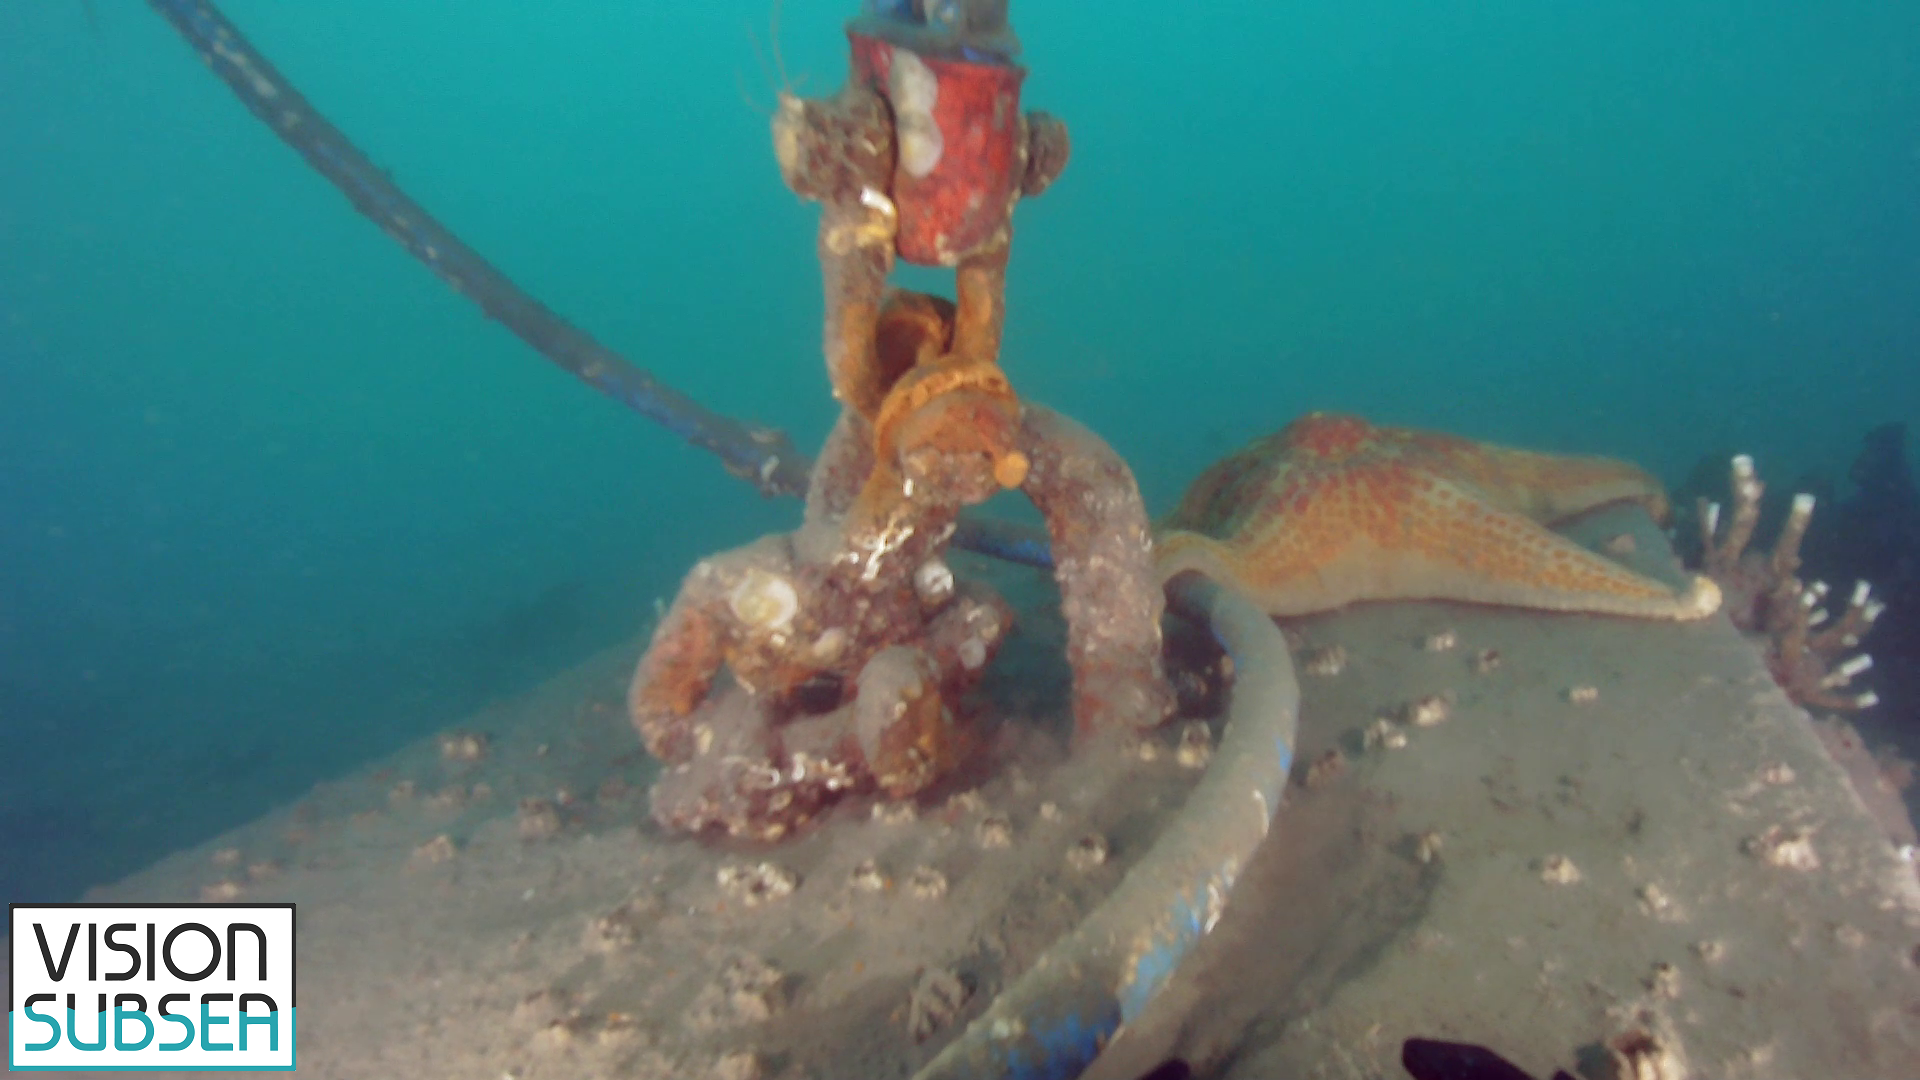 Vision Subsea inspecting a mooring with an ROV